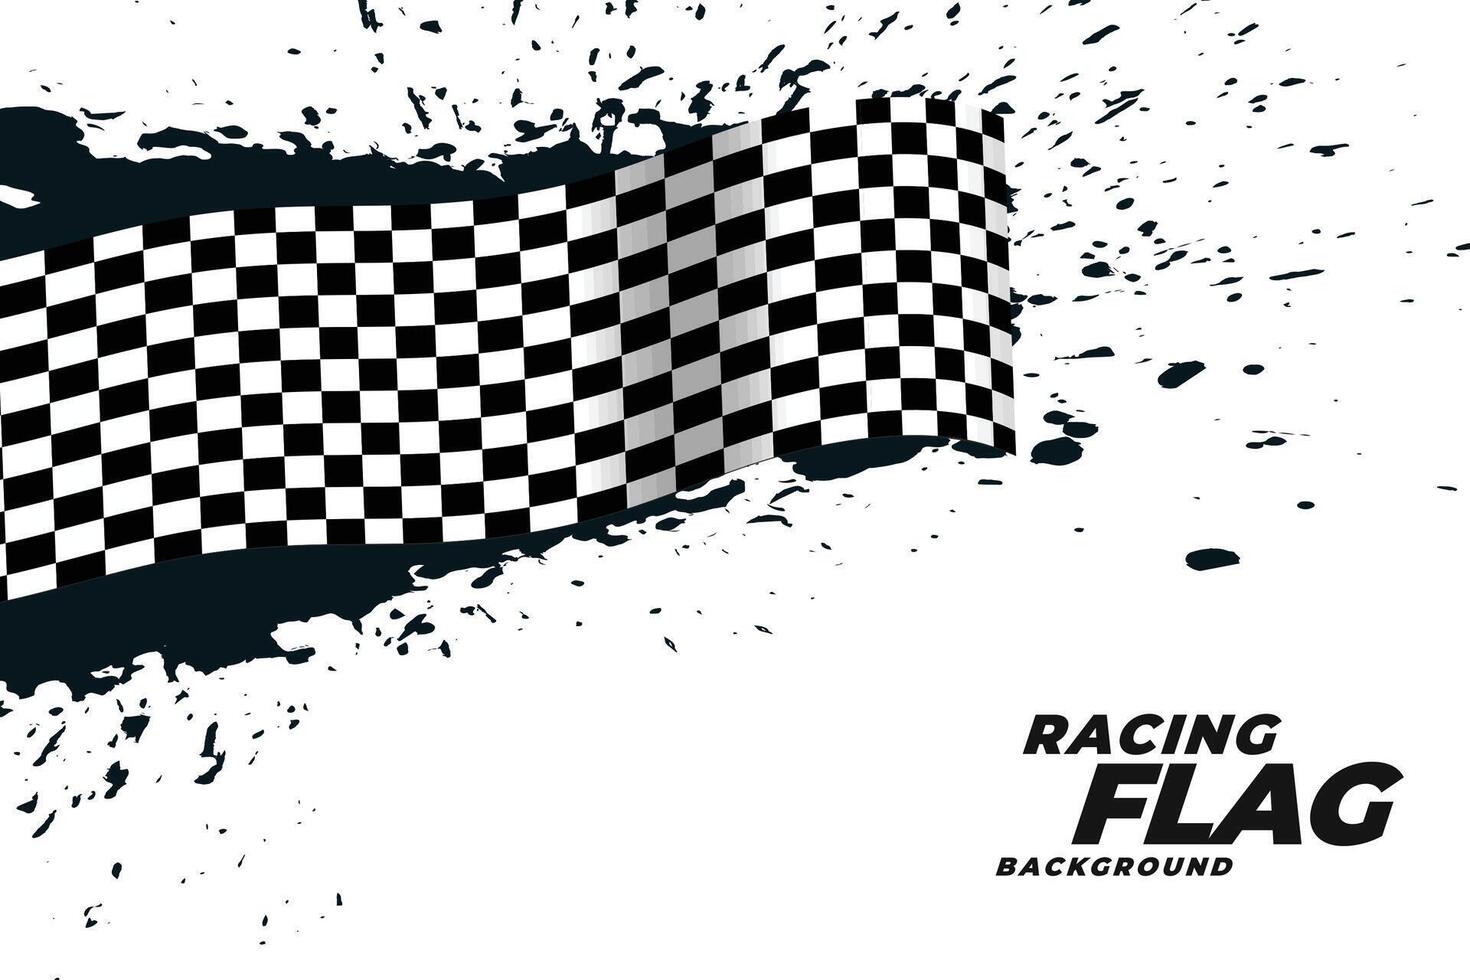 abstract racing vlag grunge achtergrond vector